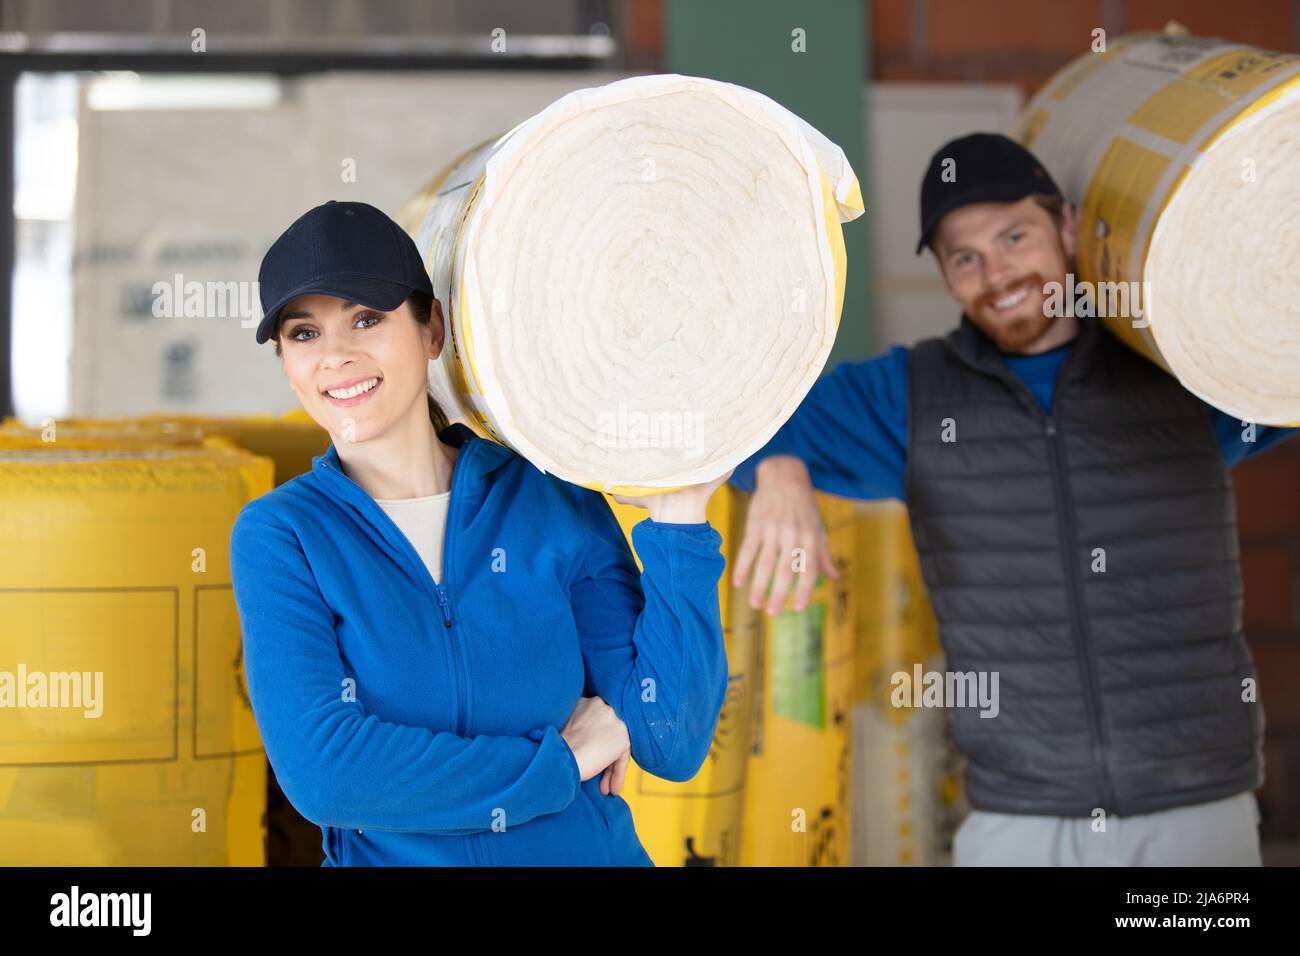 caucasian construction workers with rolls of insulating material Stock Photo